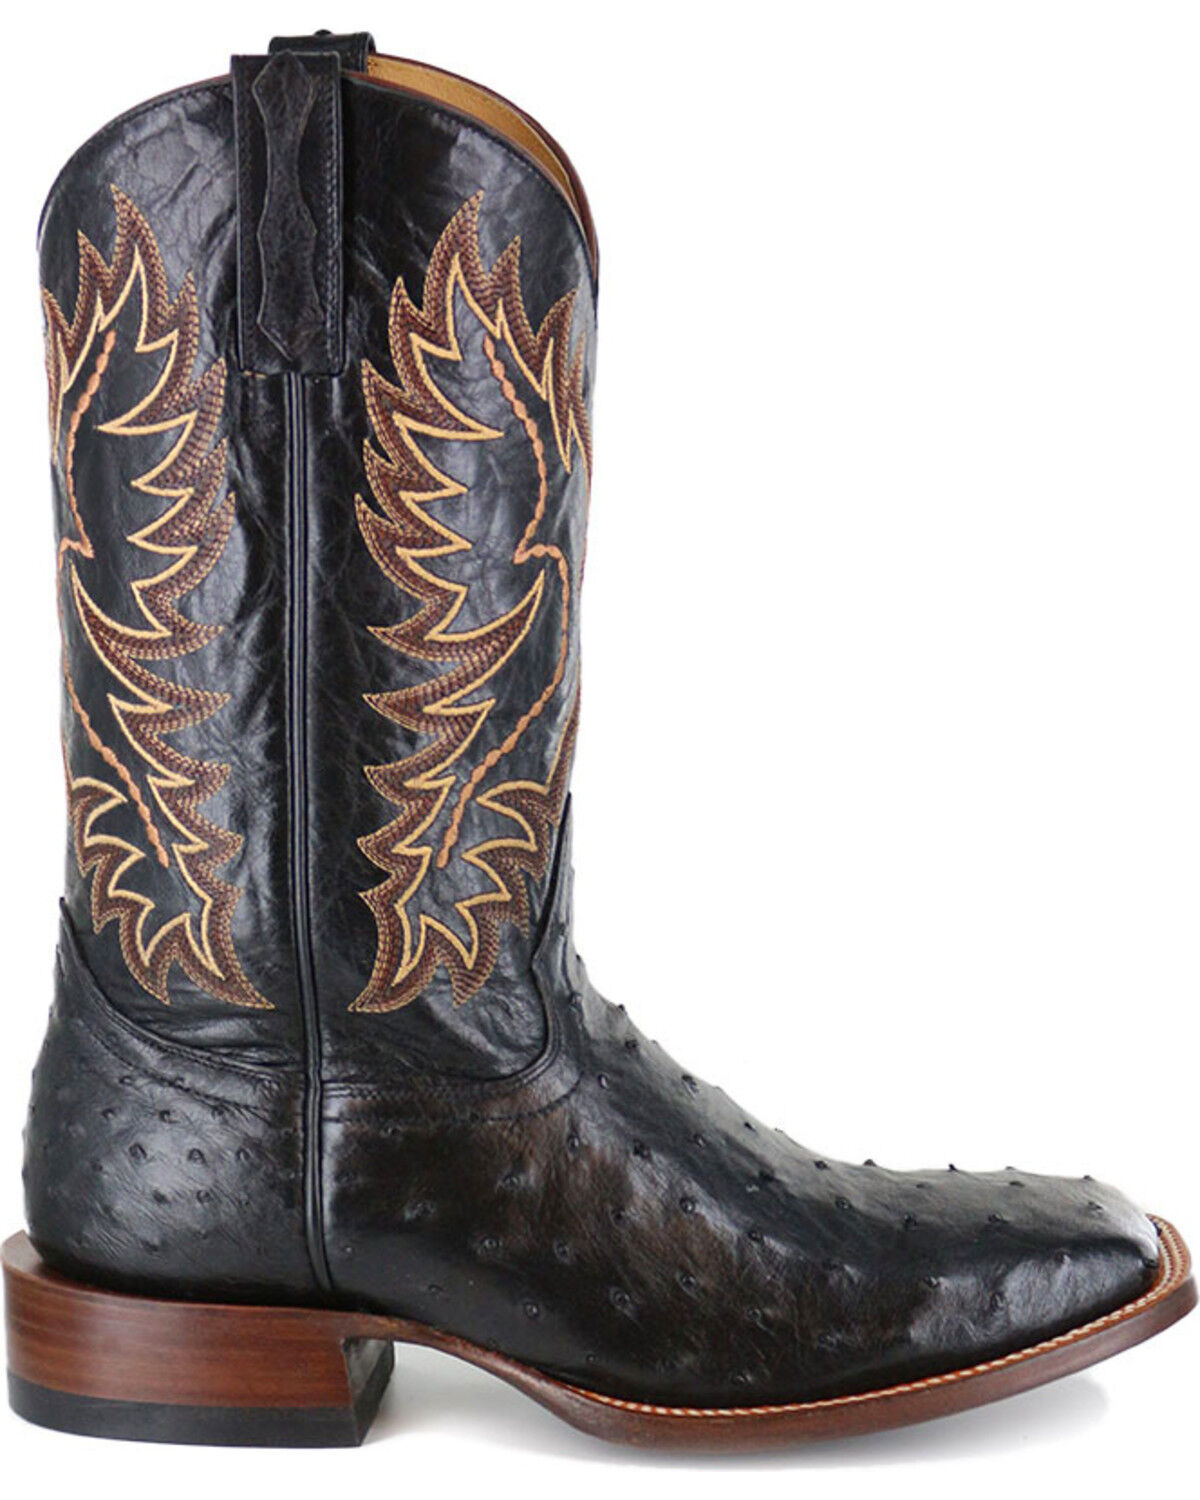 Men's Full Quill Ostrich Exotic Boots 